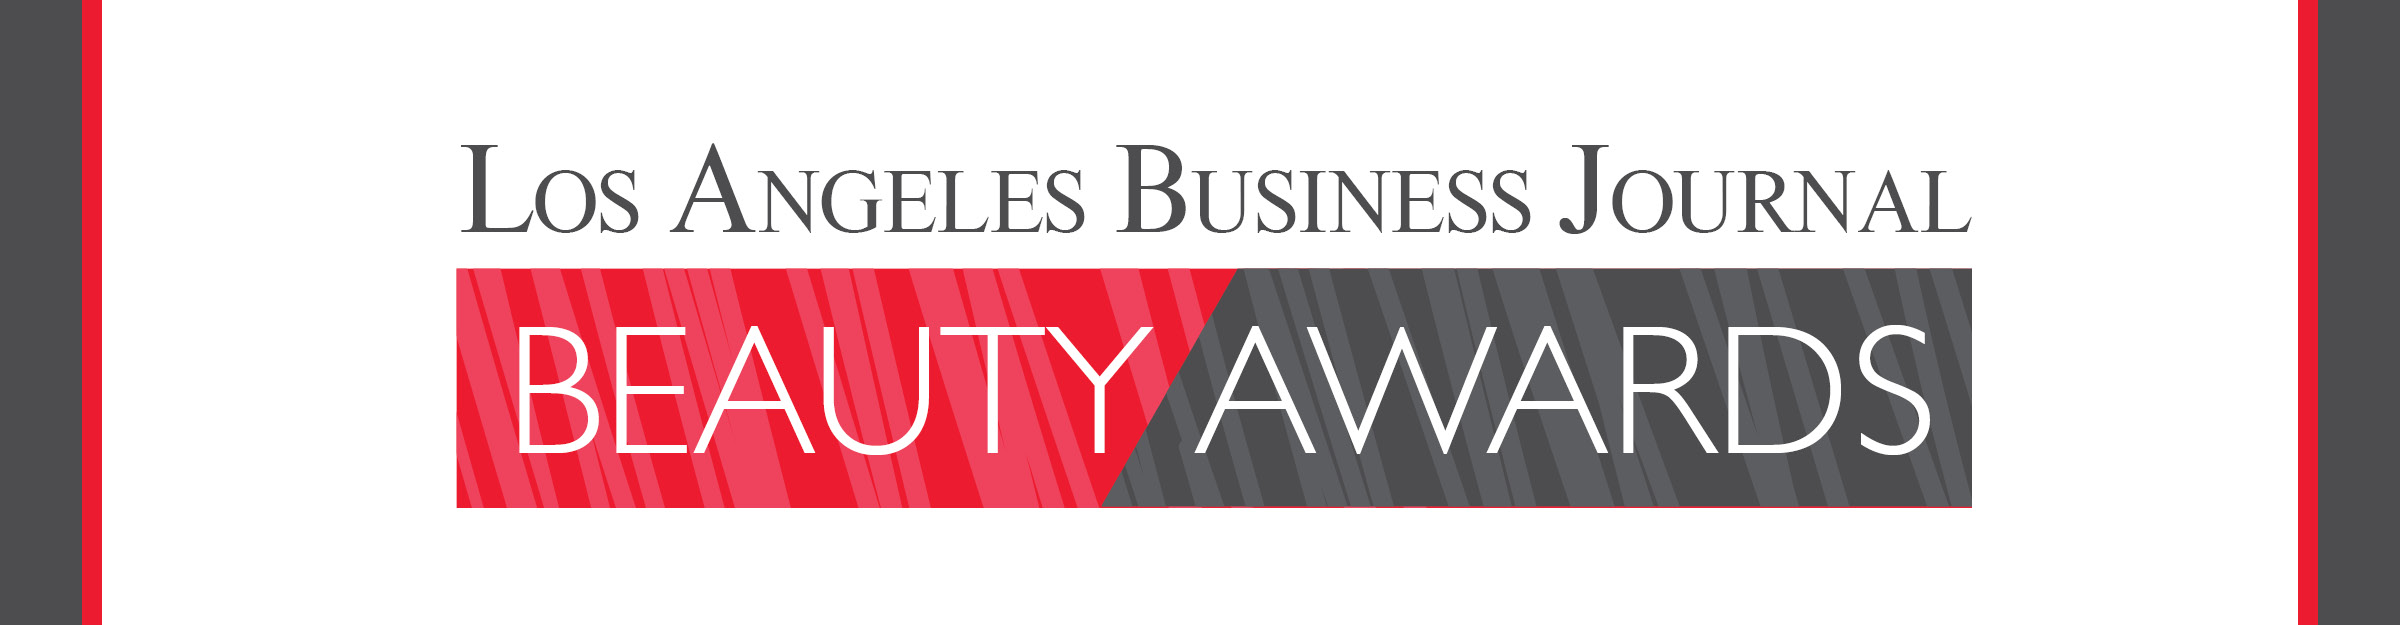 Los Angeles Business Journal Beauty Awards Event Banner